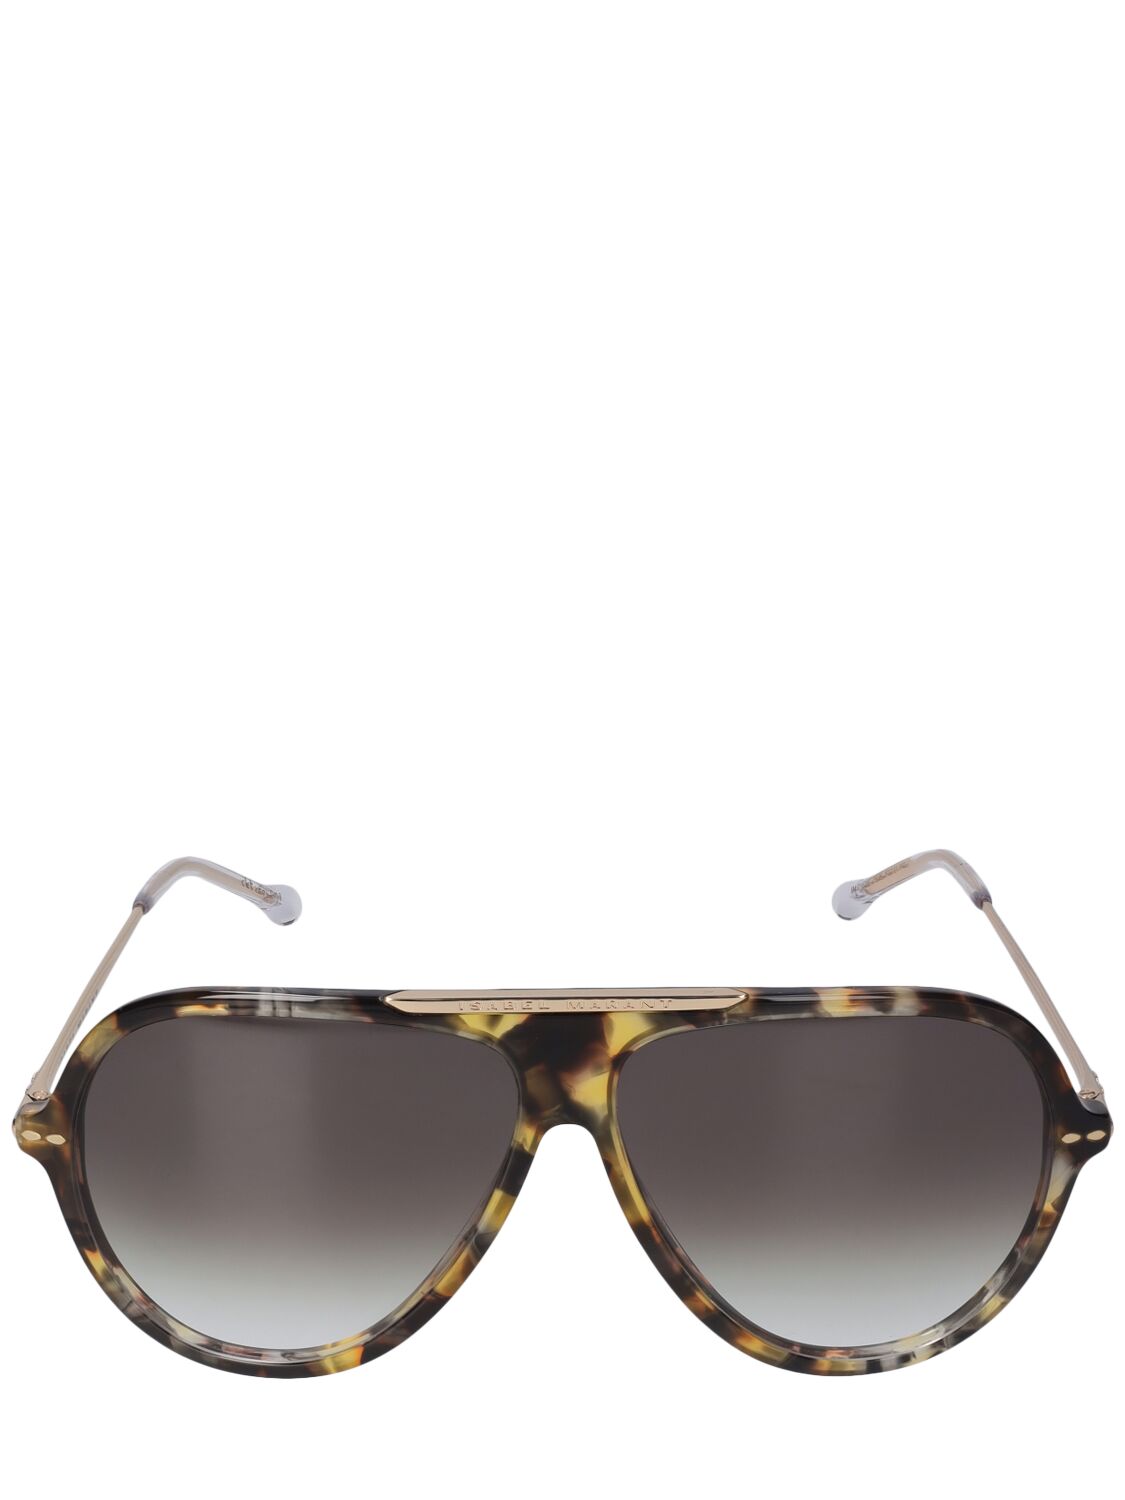 Isabel Marant The Luck Pilot Acetate Sunglasses In Brown